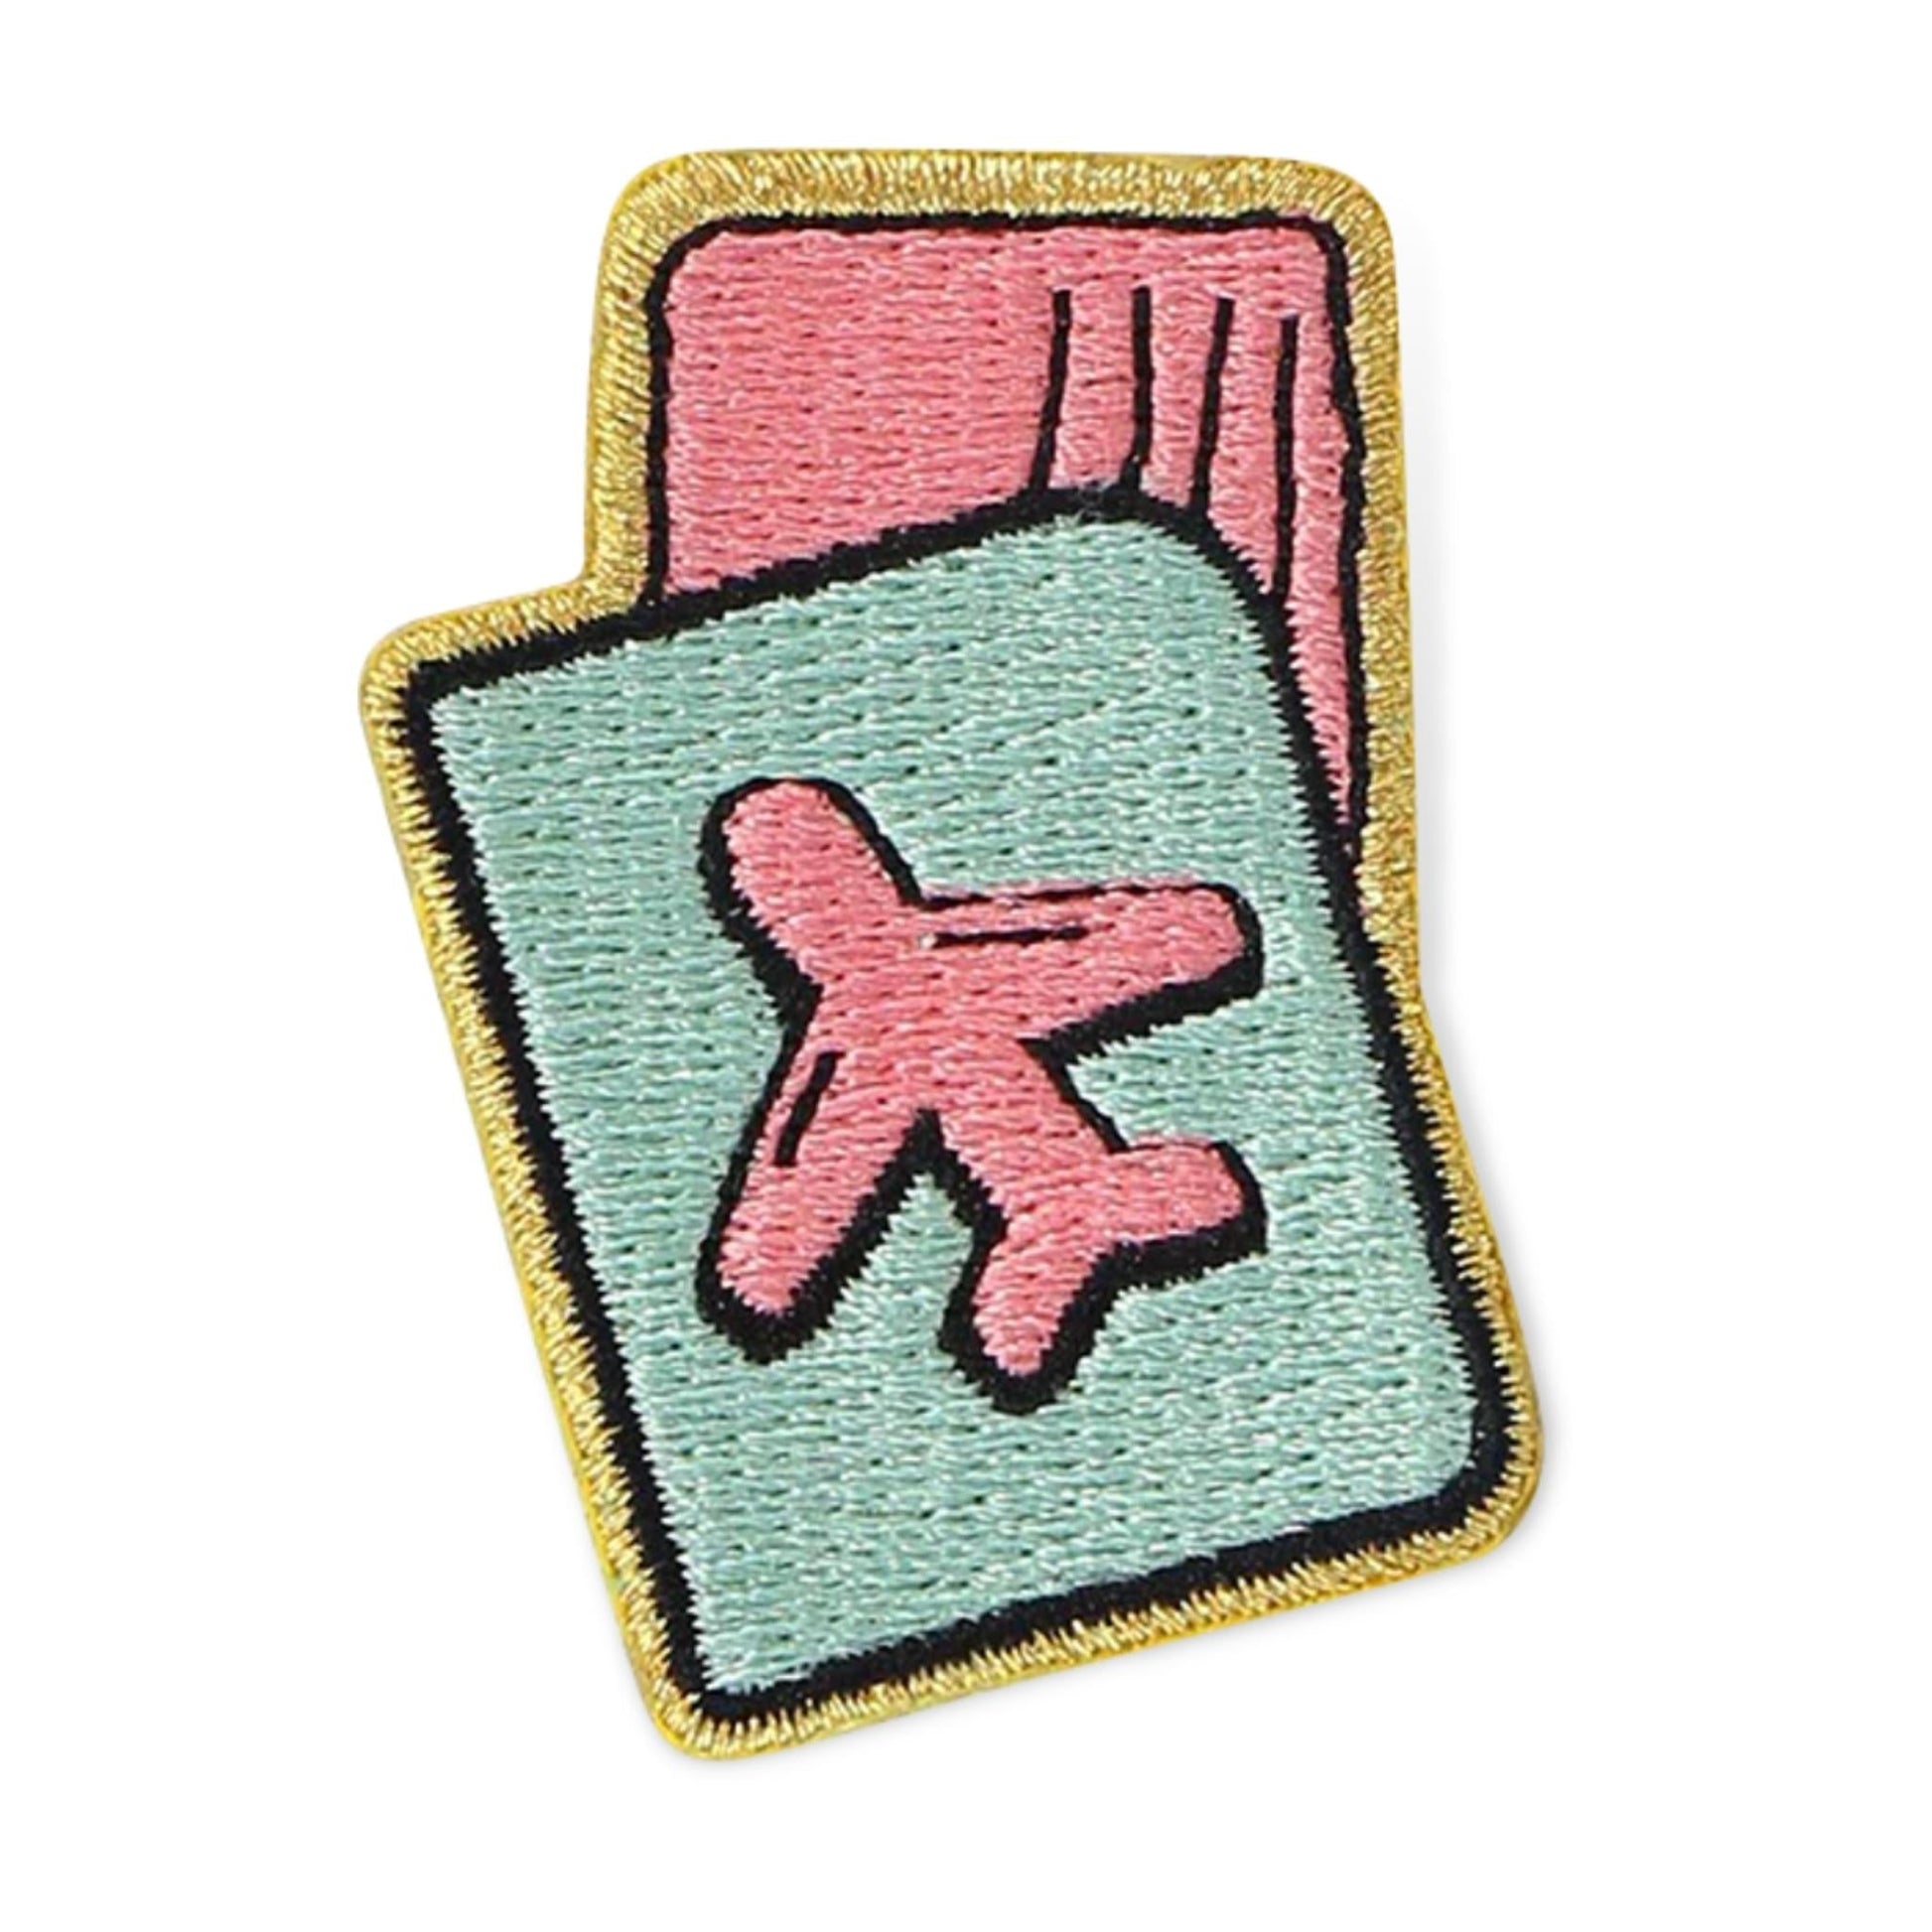 SCLN Passport Travel Patches 2 - a Spirit Animal - Patches active Aug 2022 Clover gifts